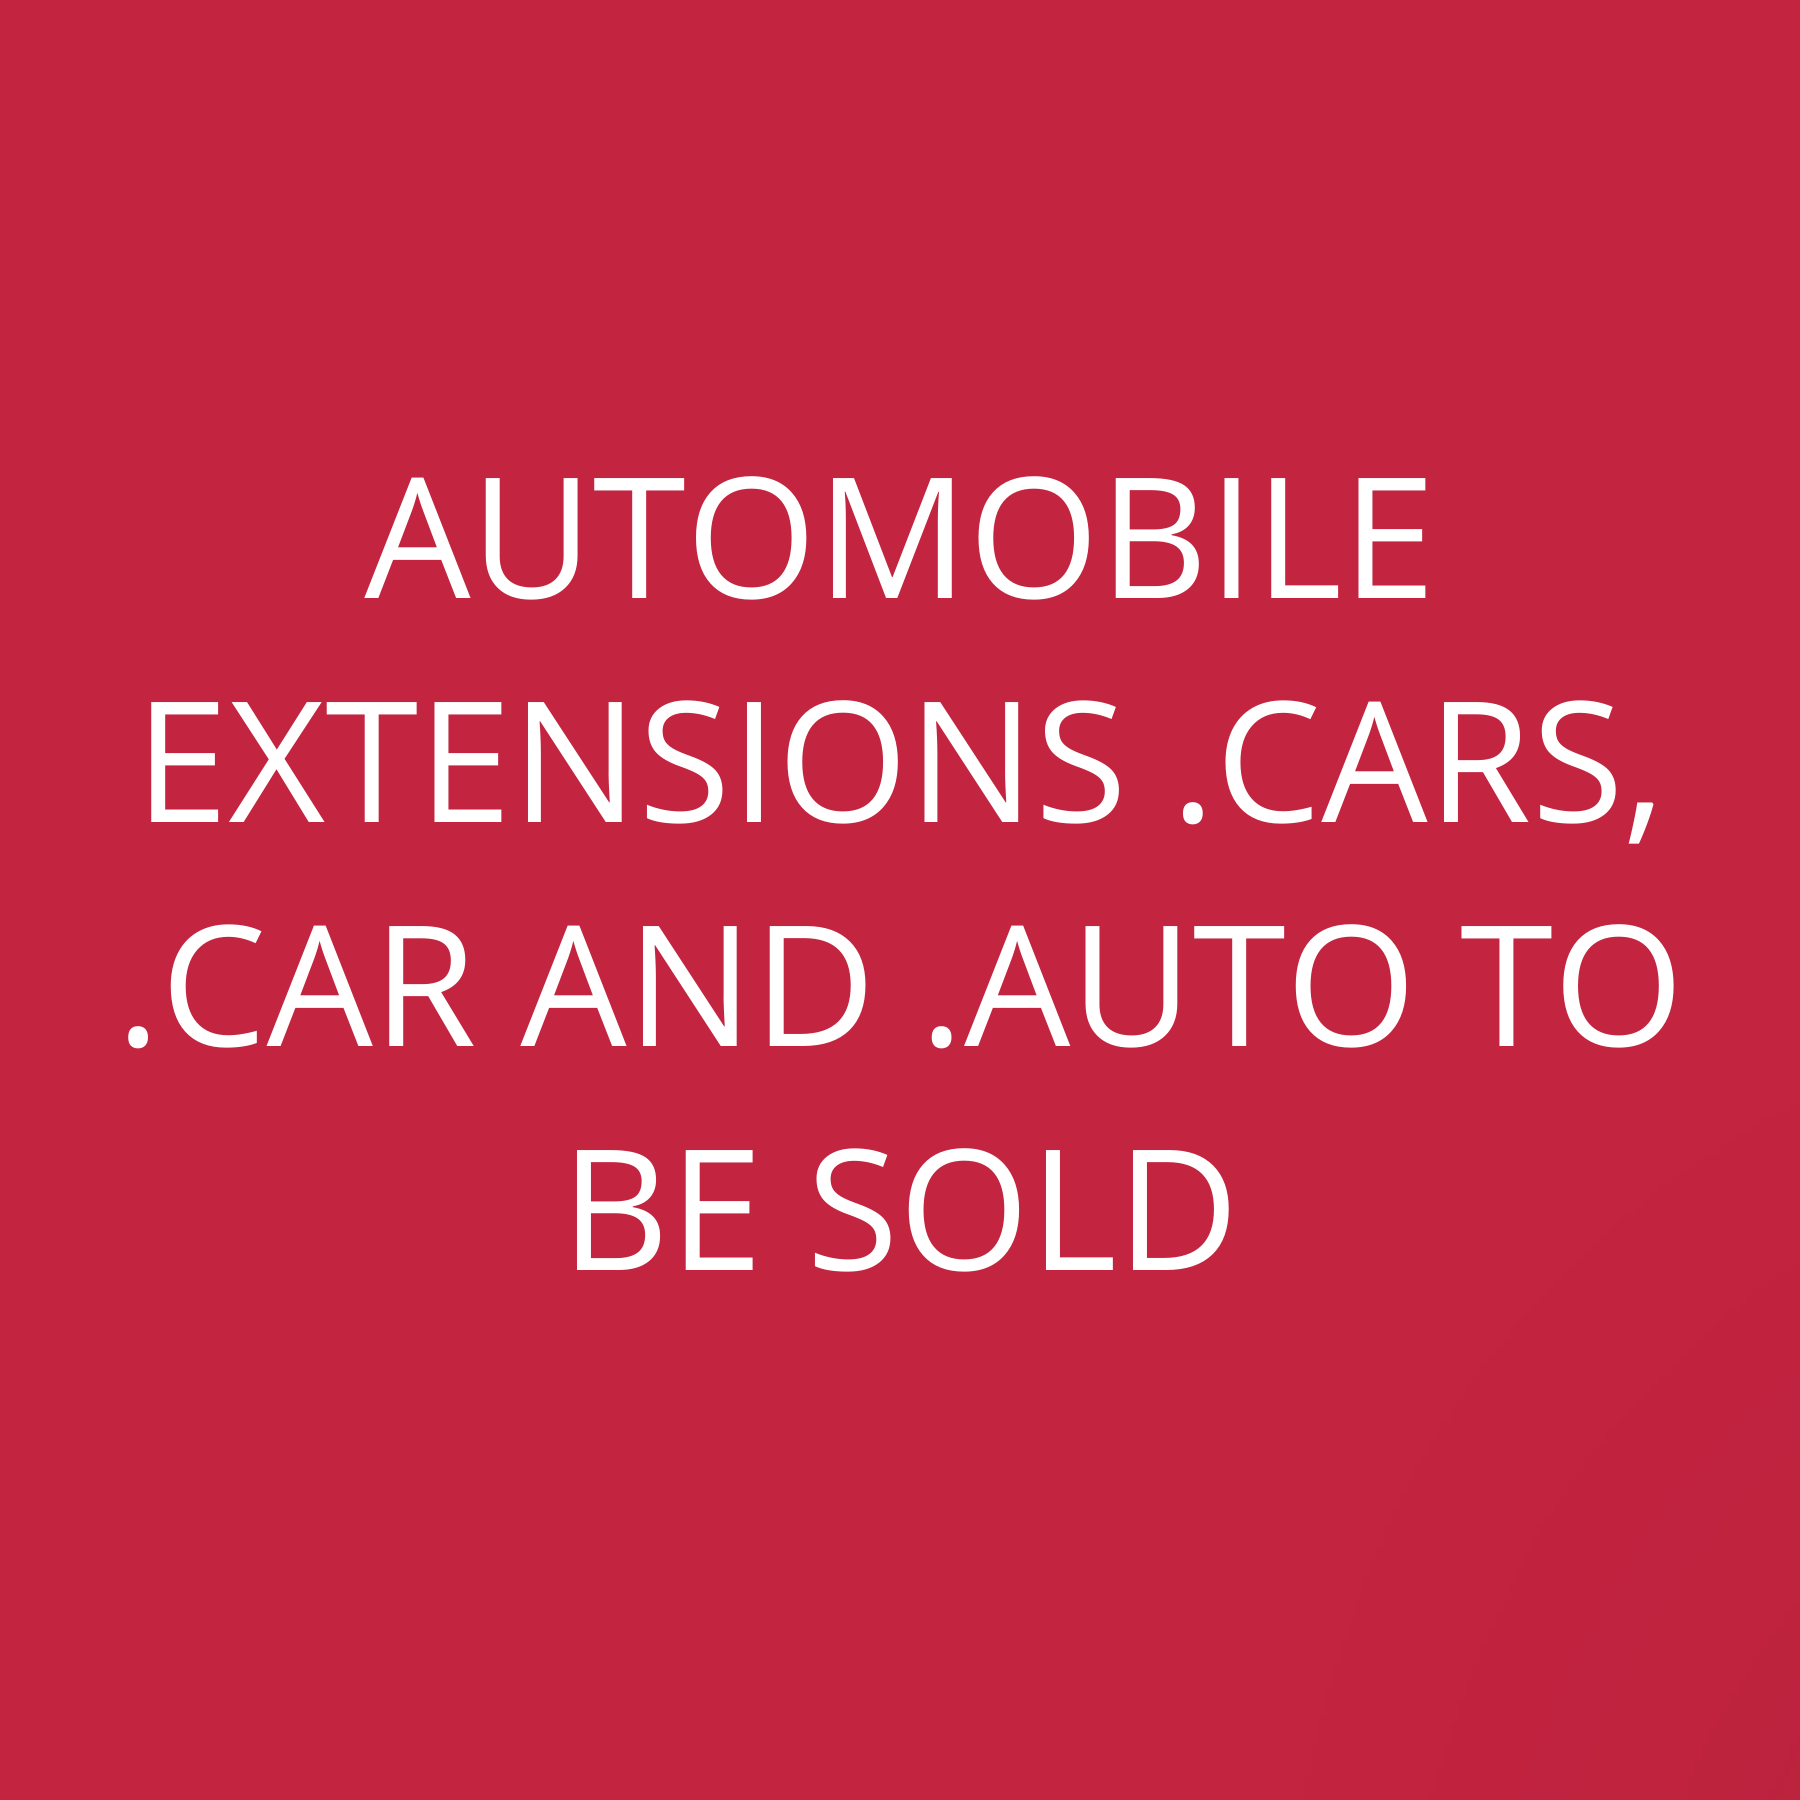 Automobile extensions .Cars, .Car and .Auto to be sold